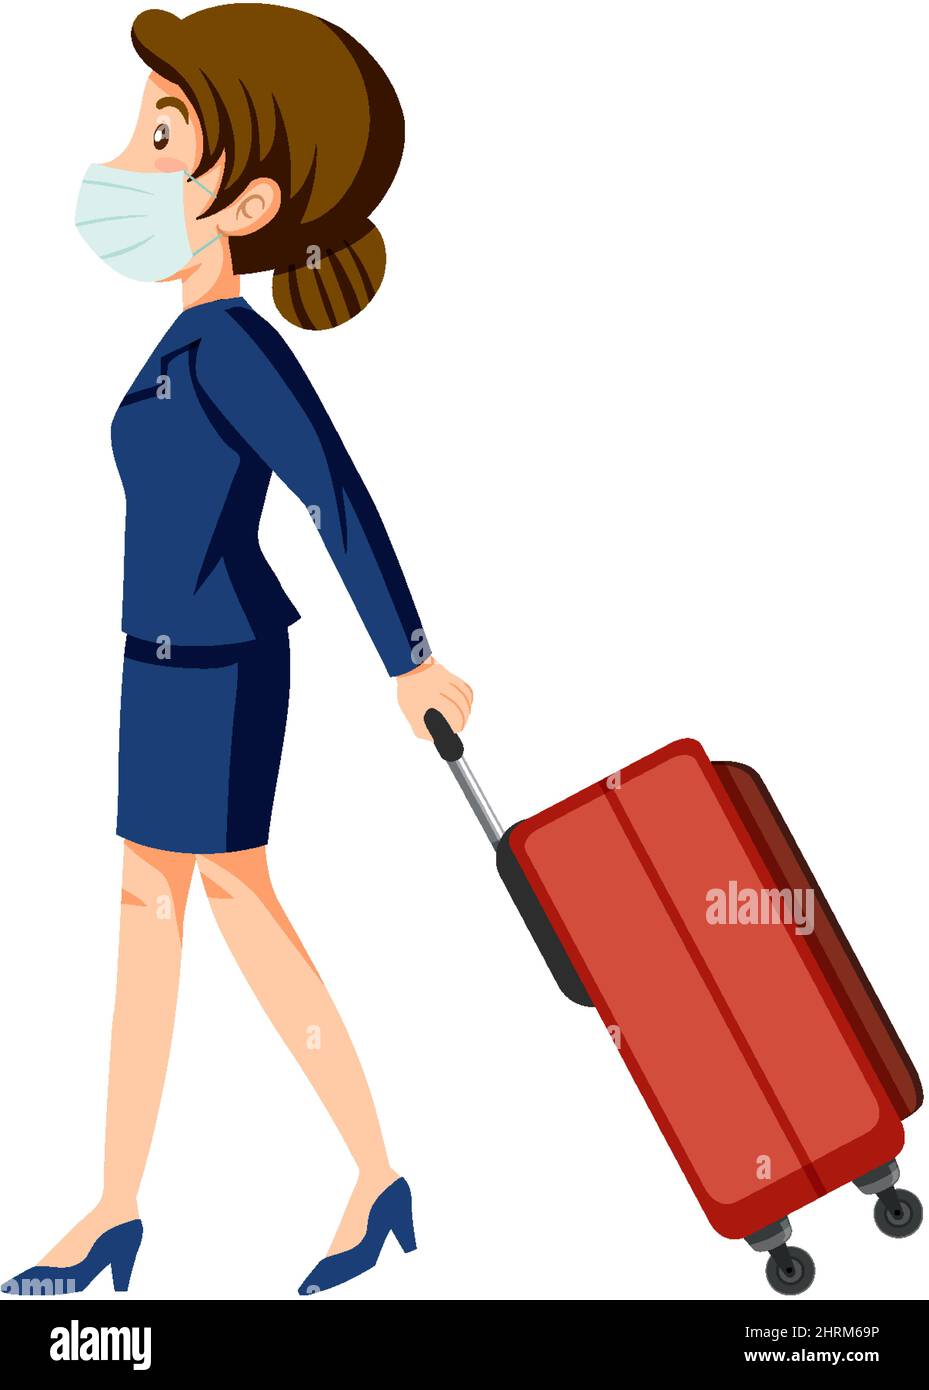 Side view of flight attendant dragging luggage illustration Stock Vector